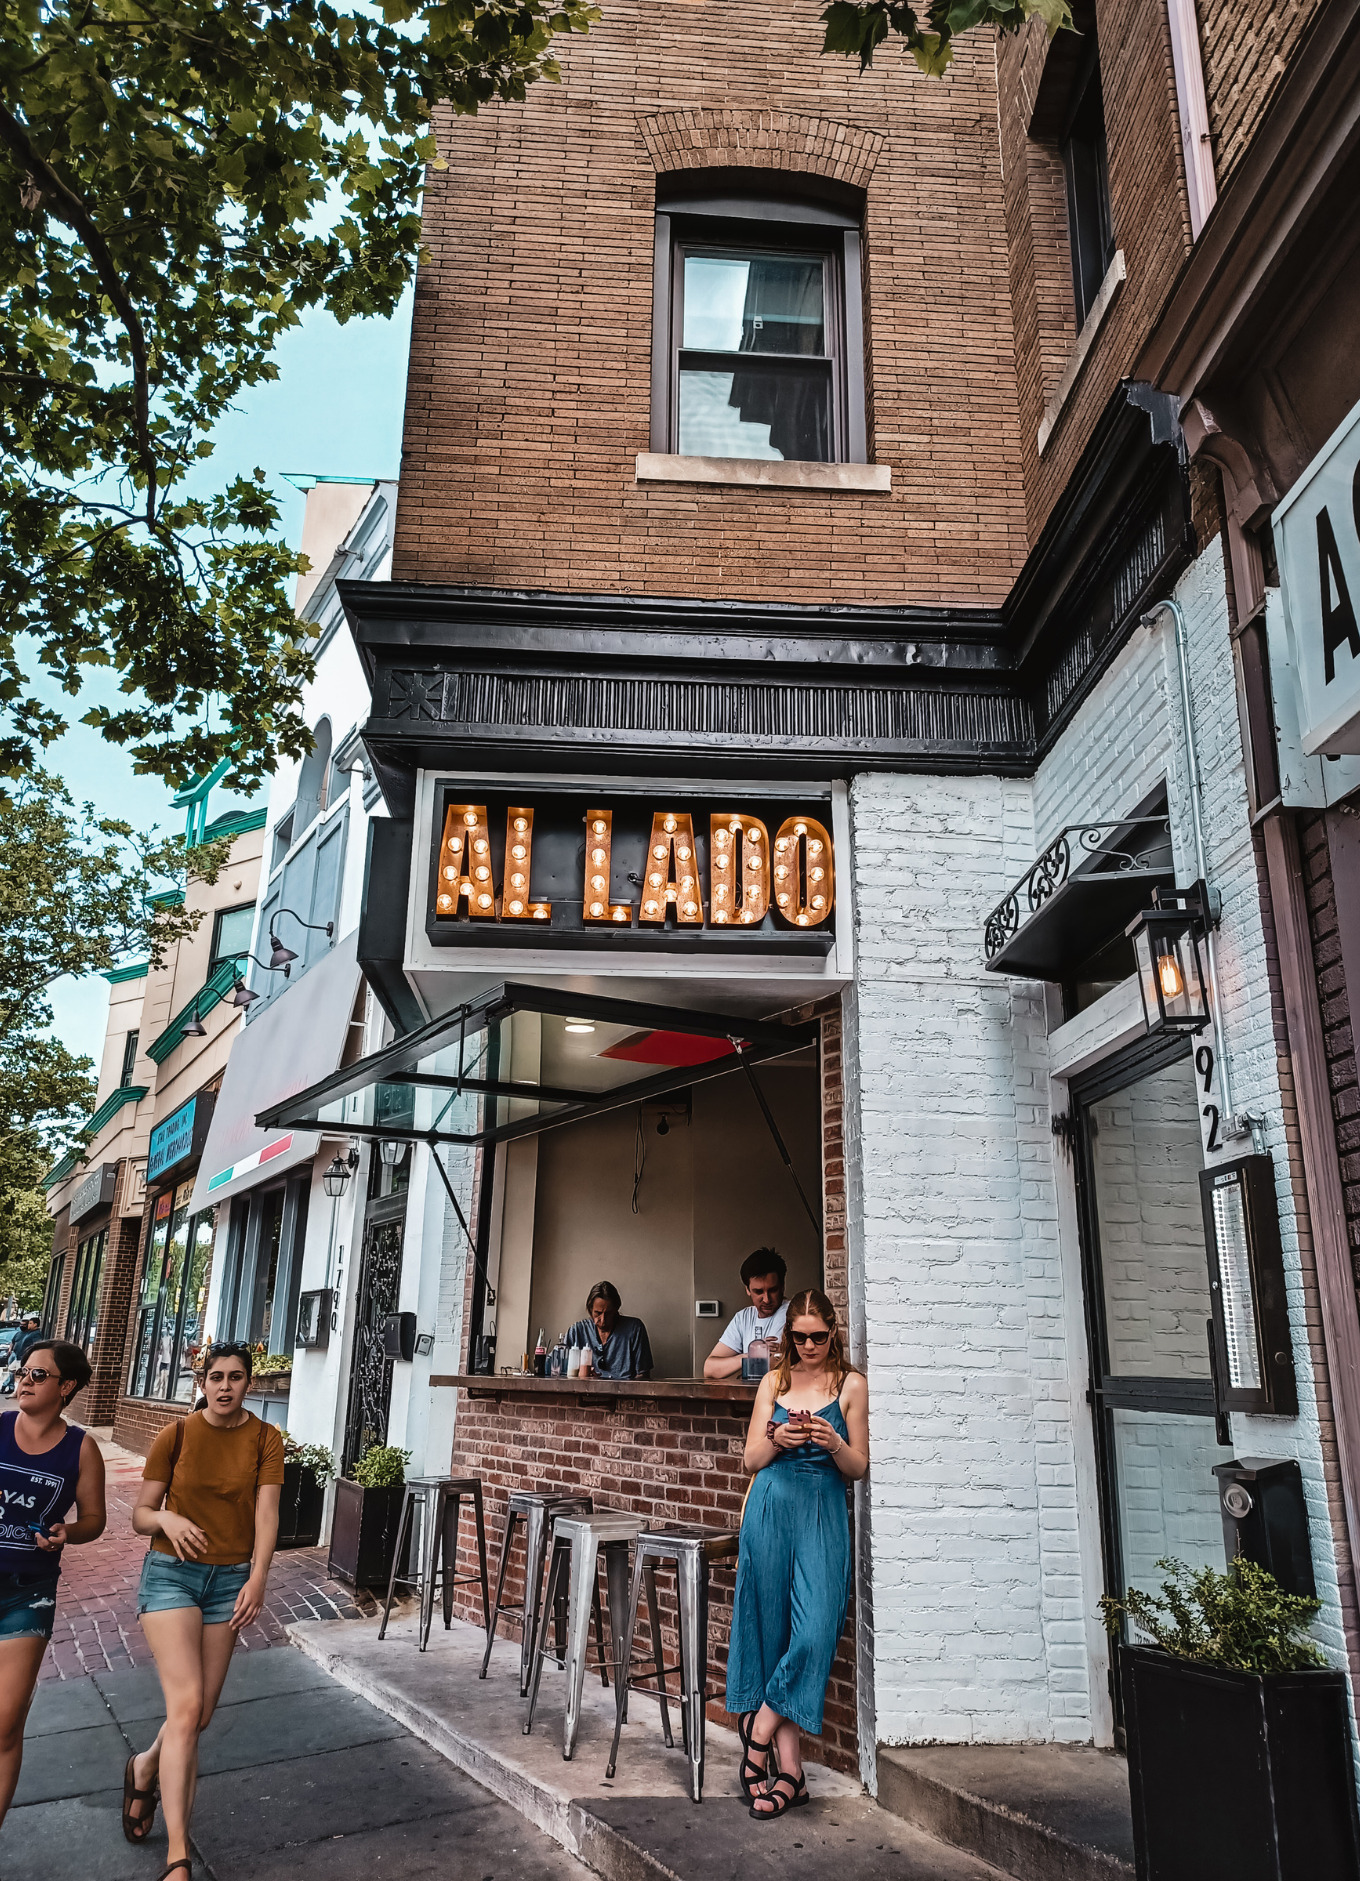 A white woman leans on the side of Al Lado restaurant while looking at her cell phone. Two women walk by talking as they take in the sights of Adams Morgan, one of the most walkable areas in Washington, DC In the Washington, DC vs Virginia battle for walkability, DC wins. 